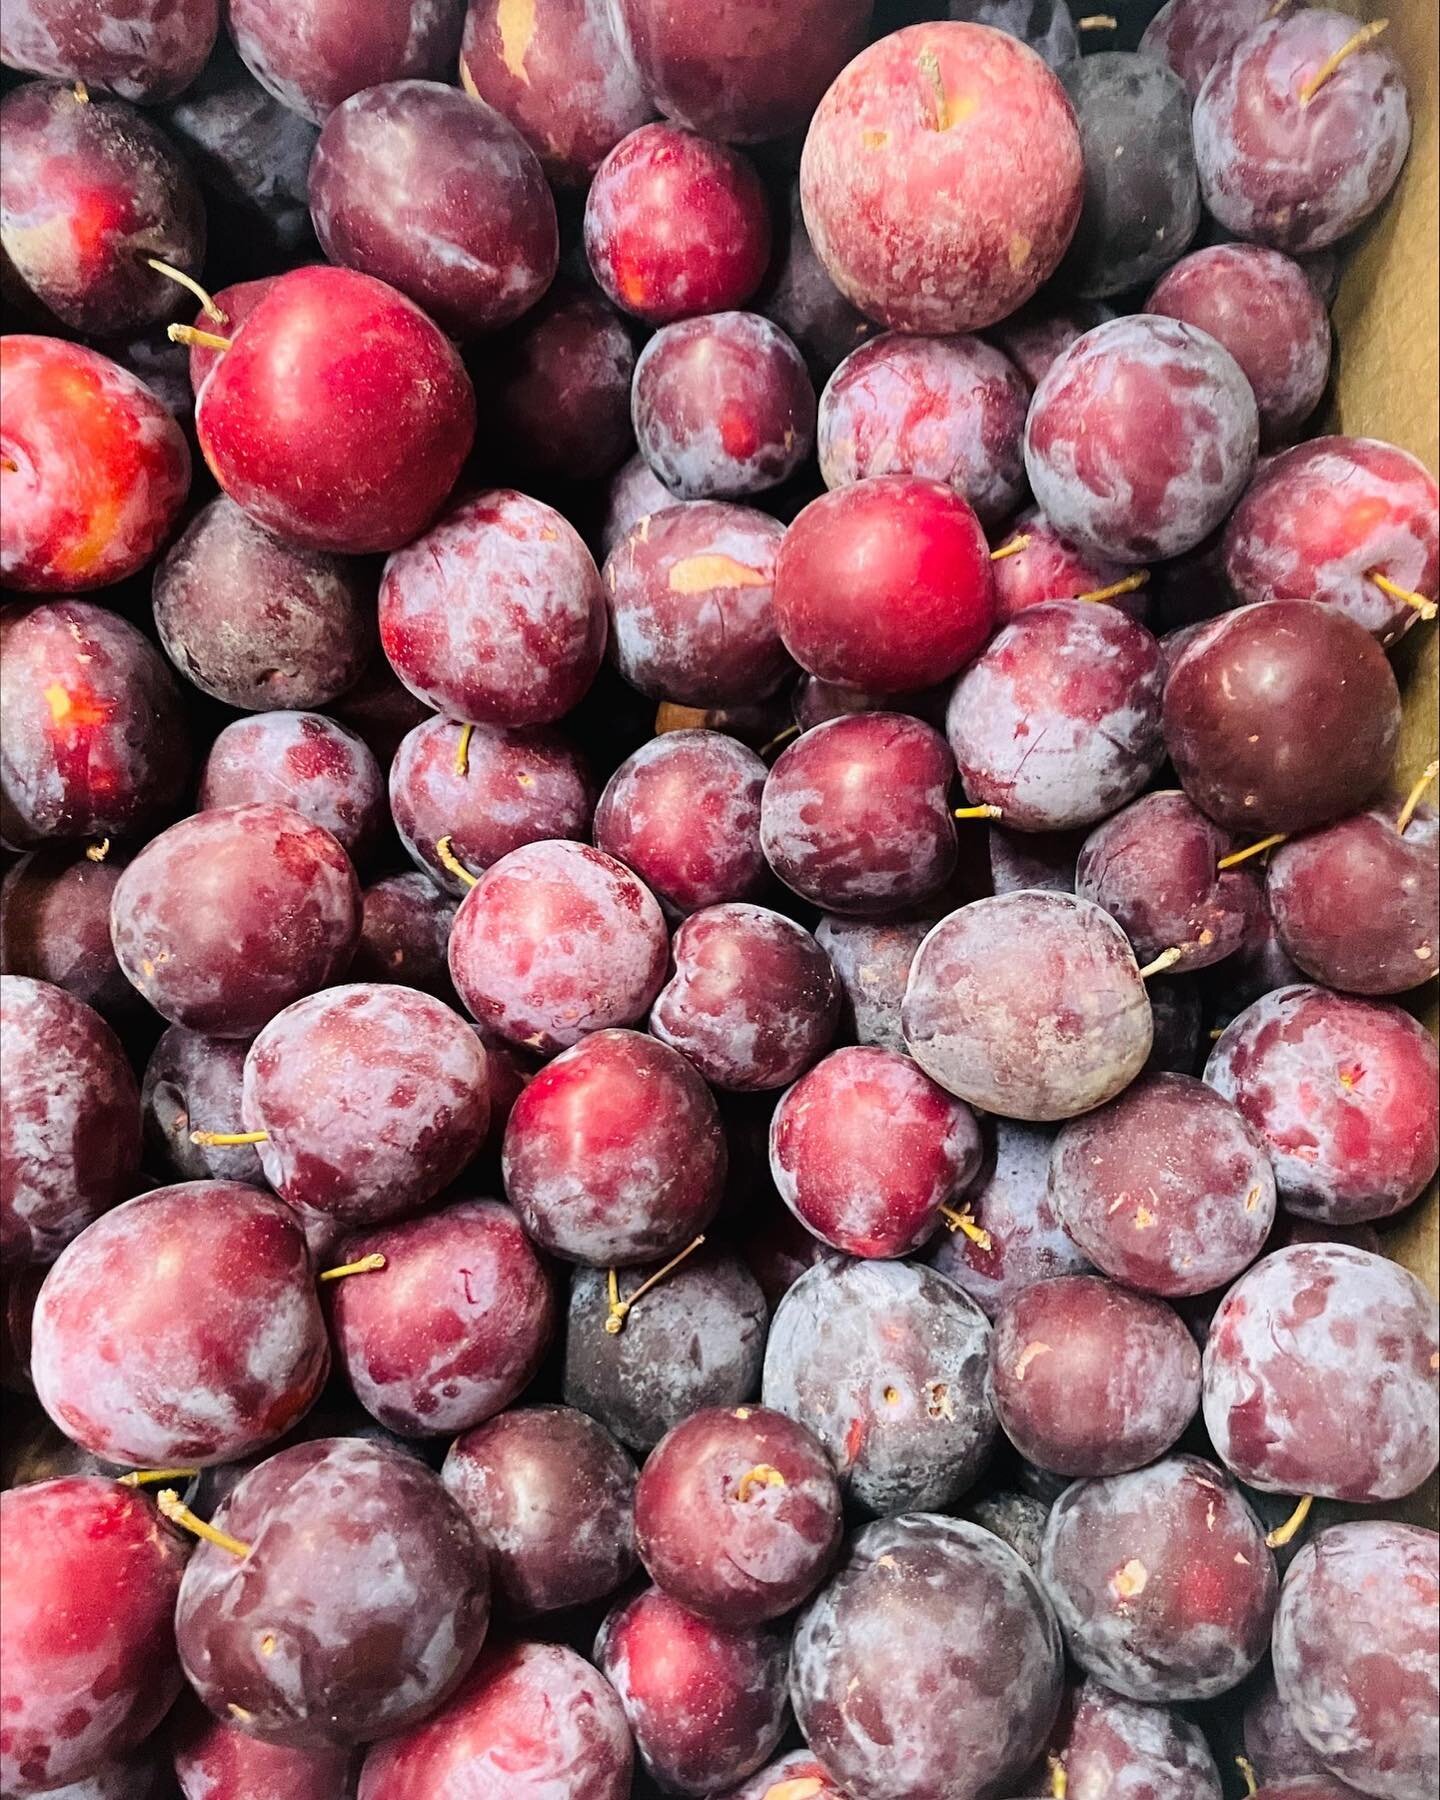 So much goodness available this week! Fruit includes plums, peaches, apples, strawbs, &amp; melons, plus loads of veggie offerings from @groovyveggiefarm , @nettlegrovefarm , @posterityfarm &amp; Ruby Slippers Organic Farm. @nettlegrovefarm eggs are 